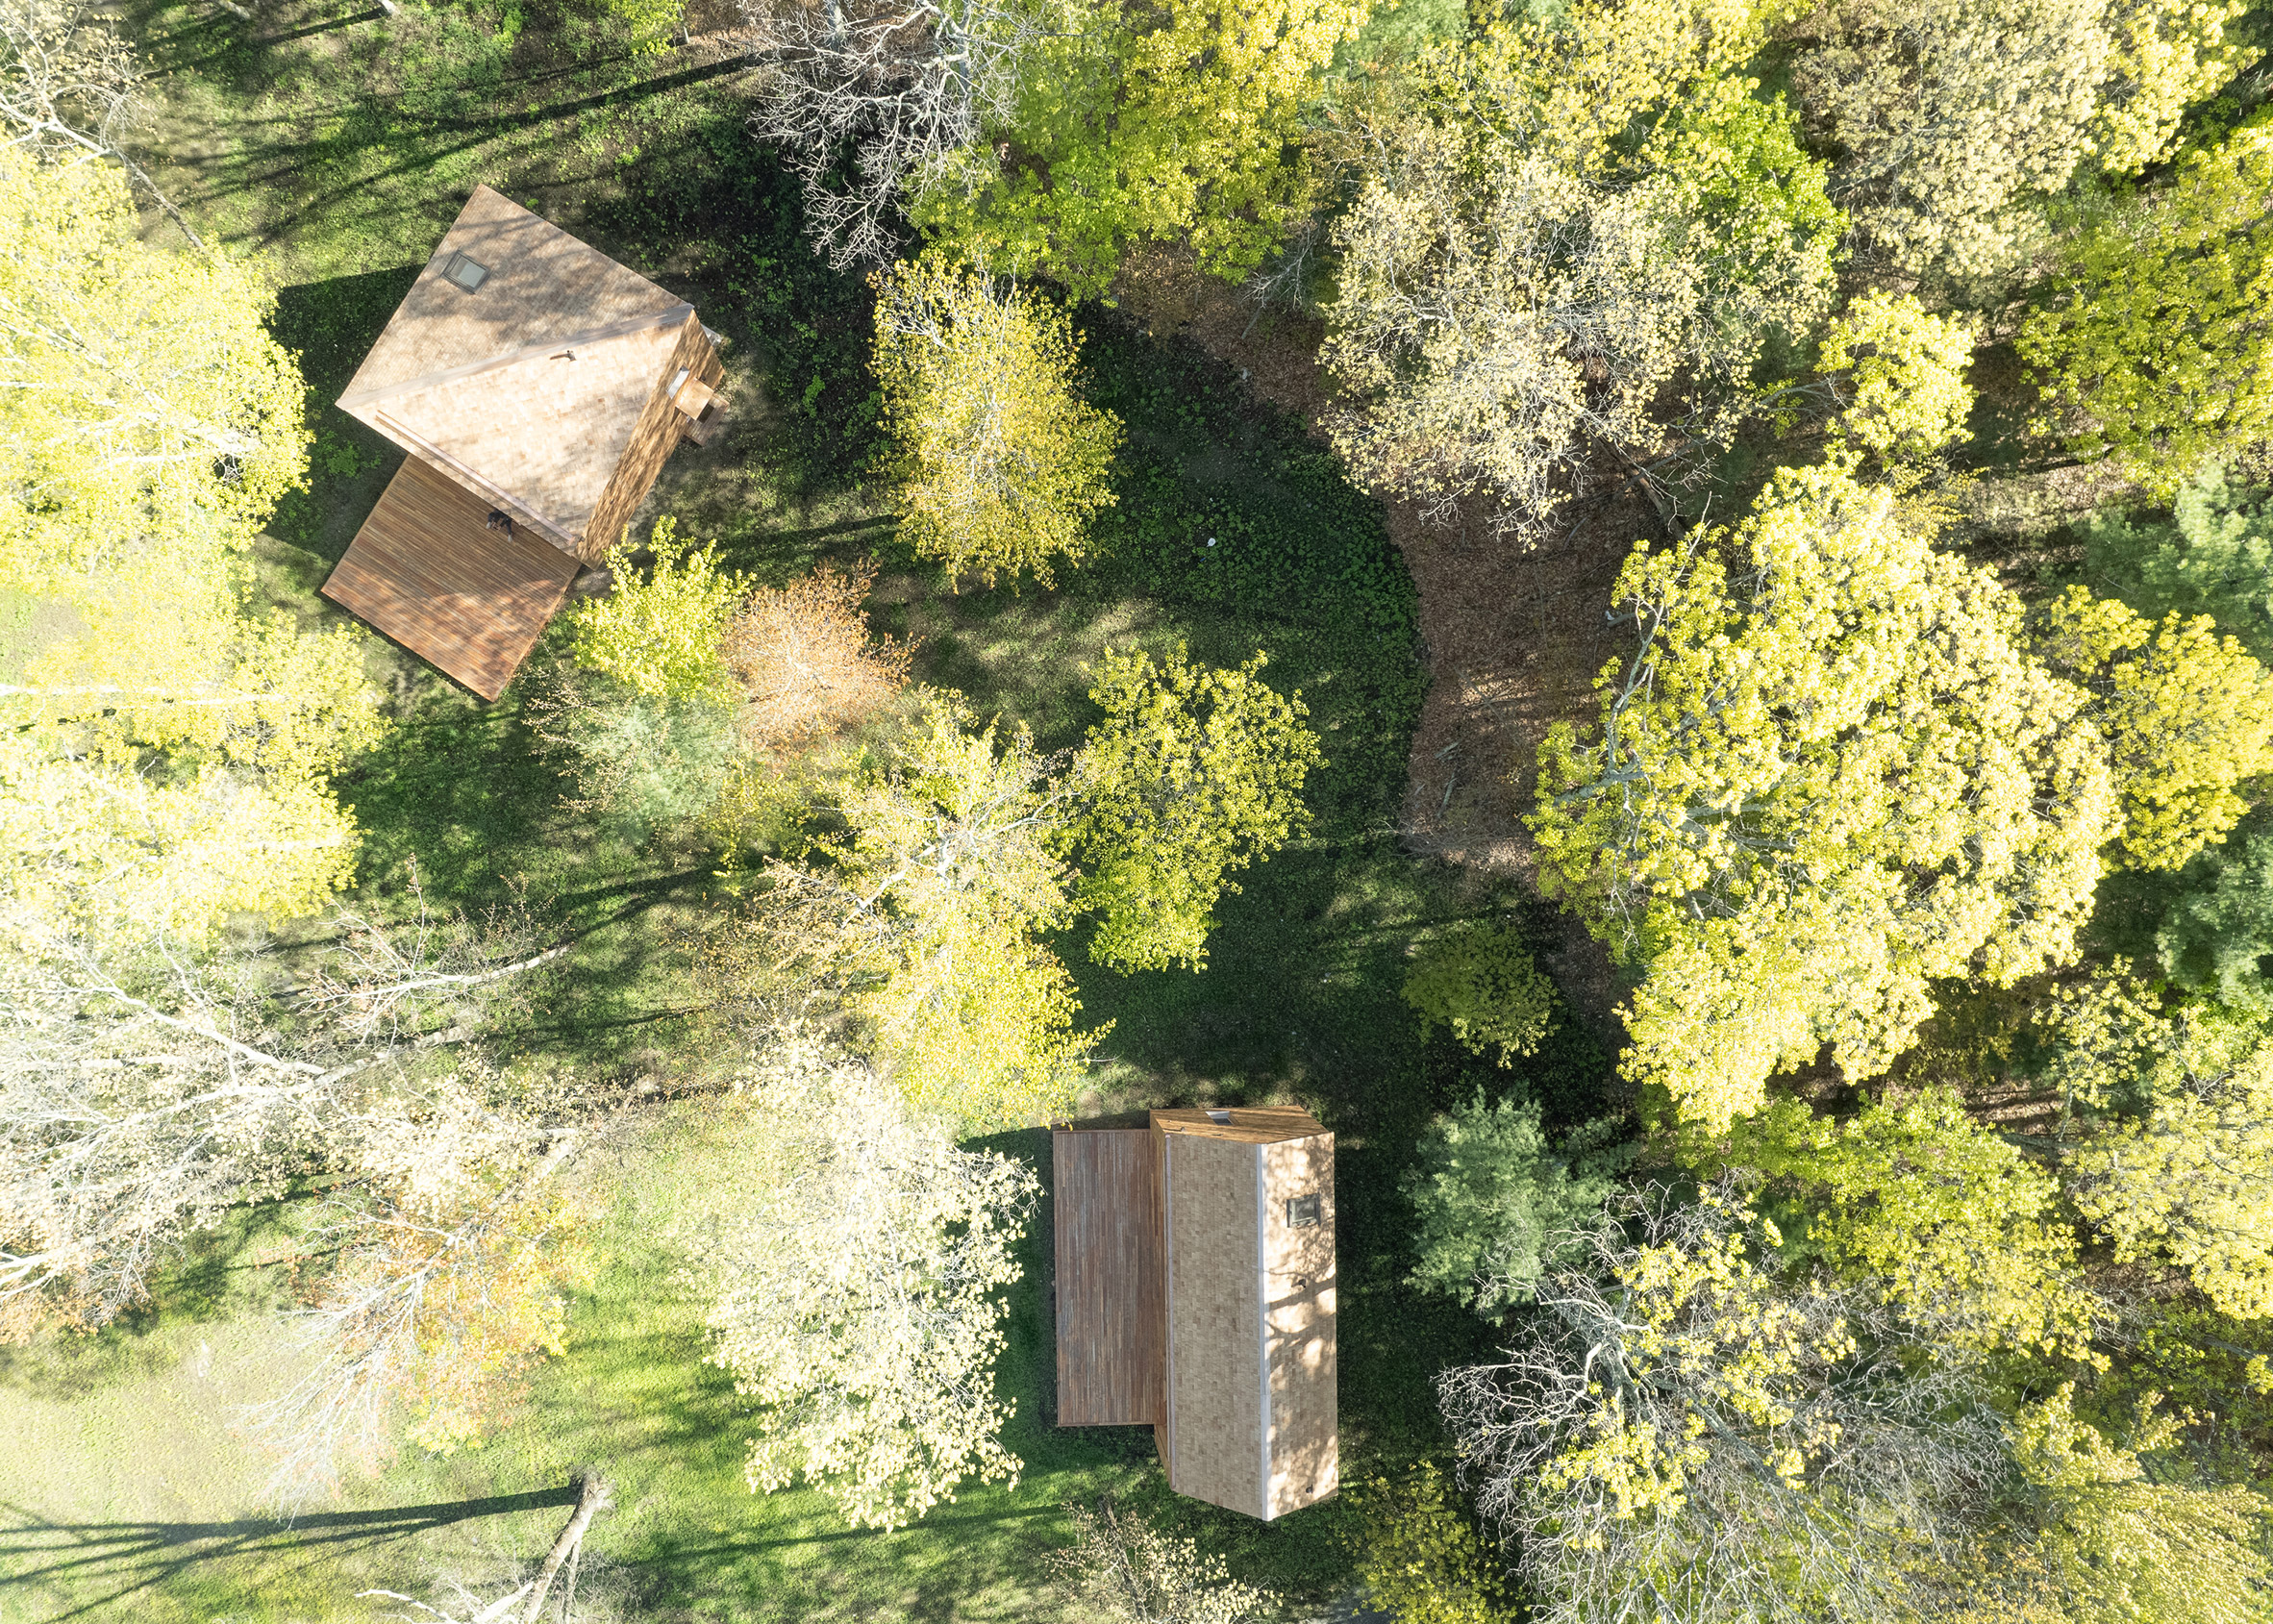 Bird's eye view of two cabins in a forest